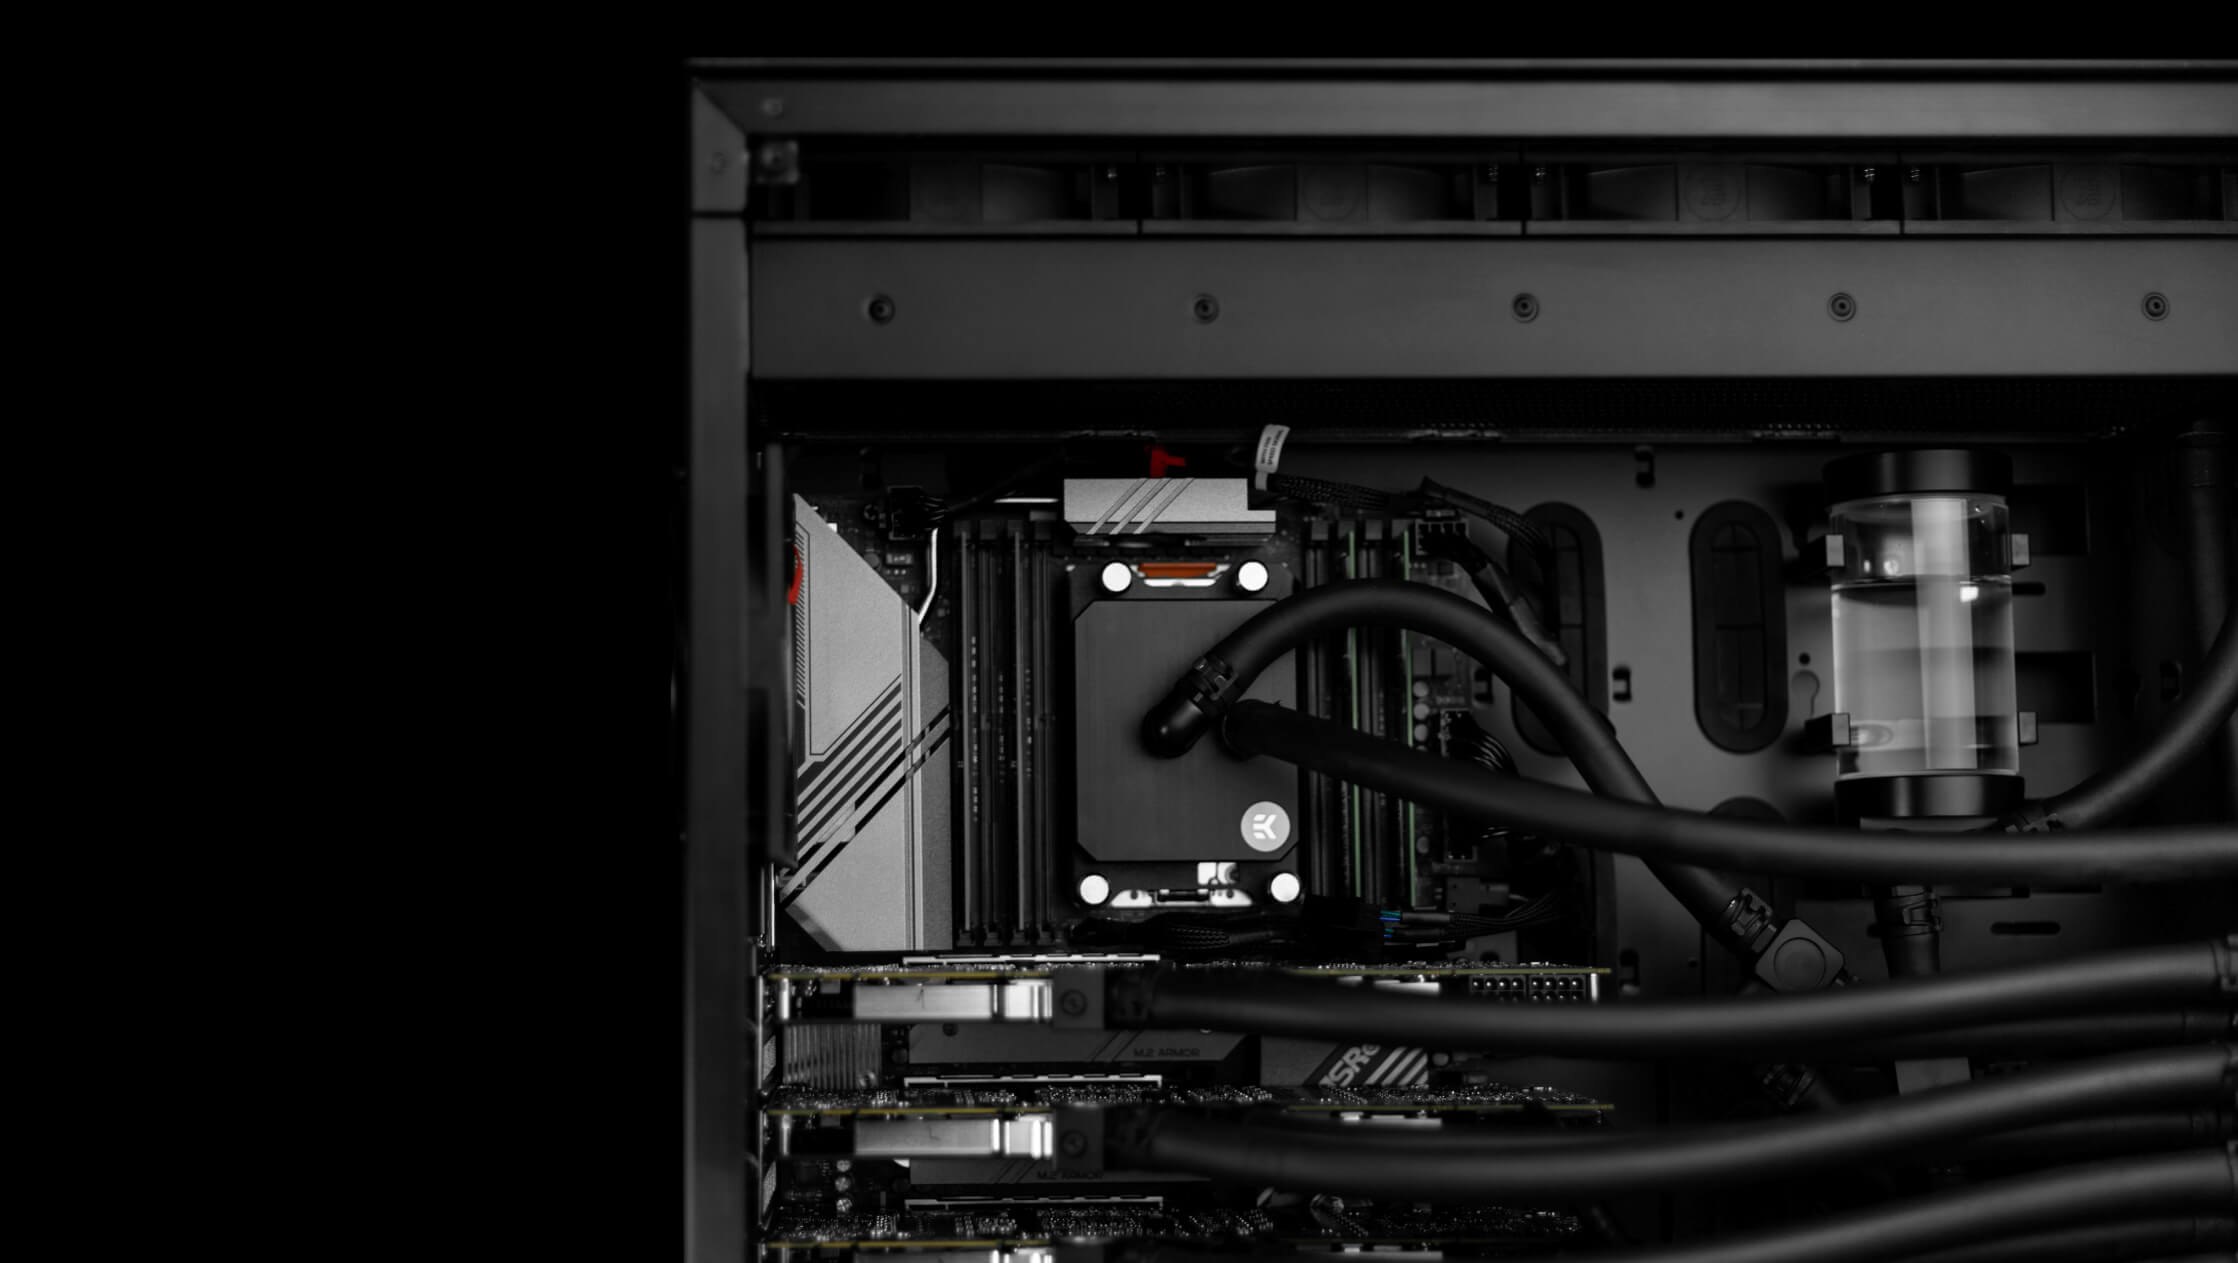 EK-Fluid Works Studio Series S5000 workstation with multiple GPUs – the ideal system for SolidWorks Visualize